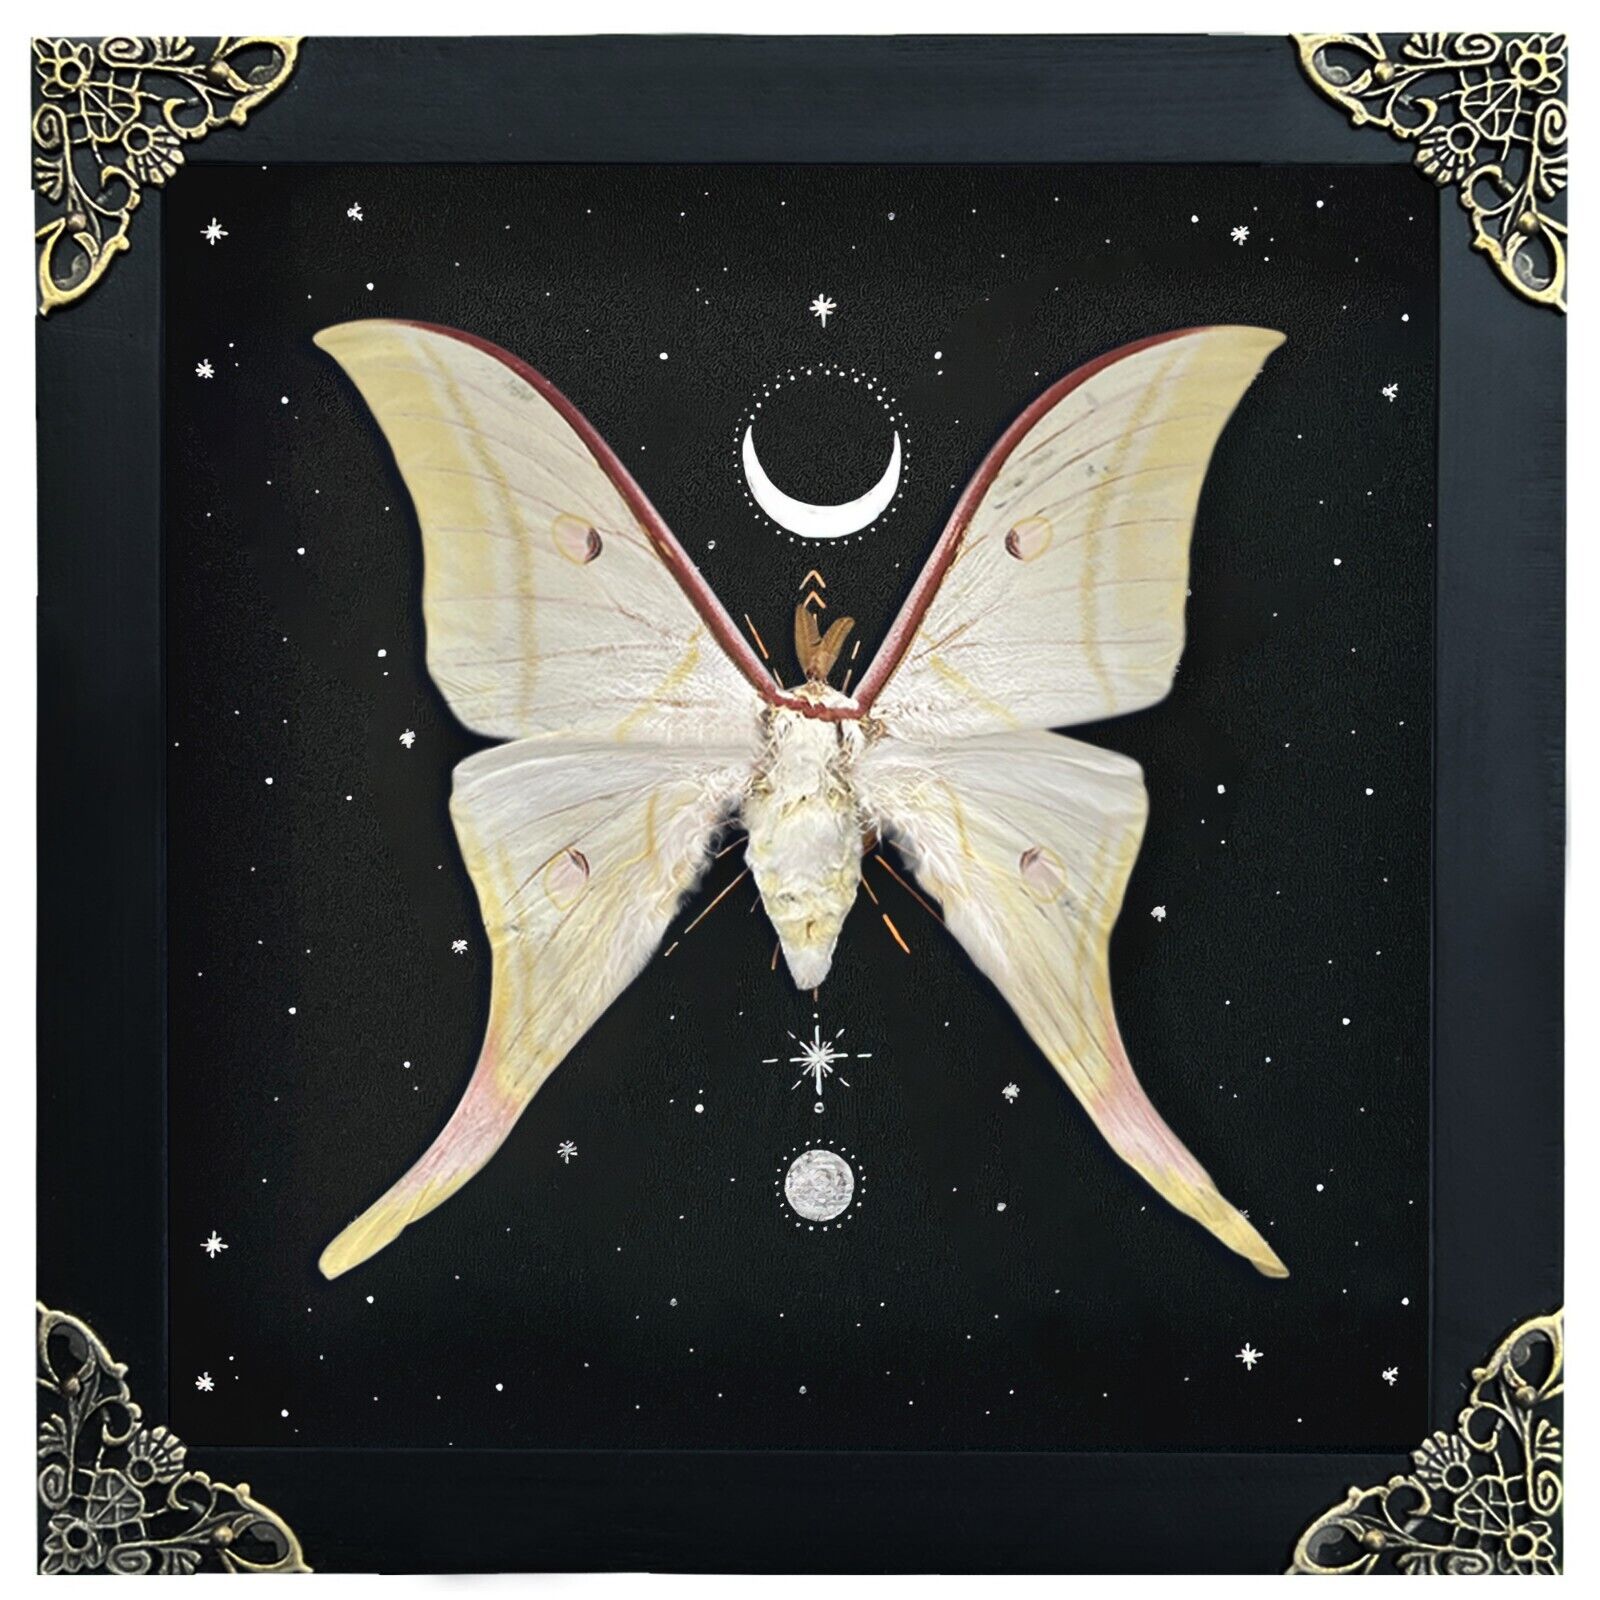 Real Luna Moth Open Wings Deep Display Shadow Box Dried Insect Collection